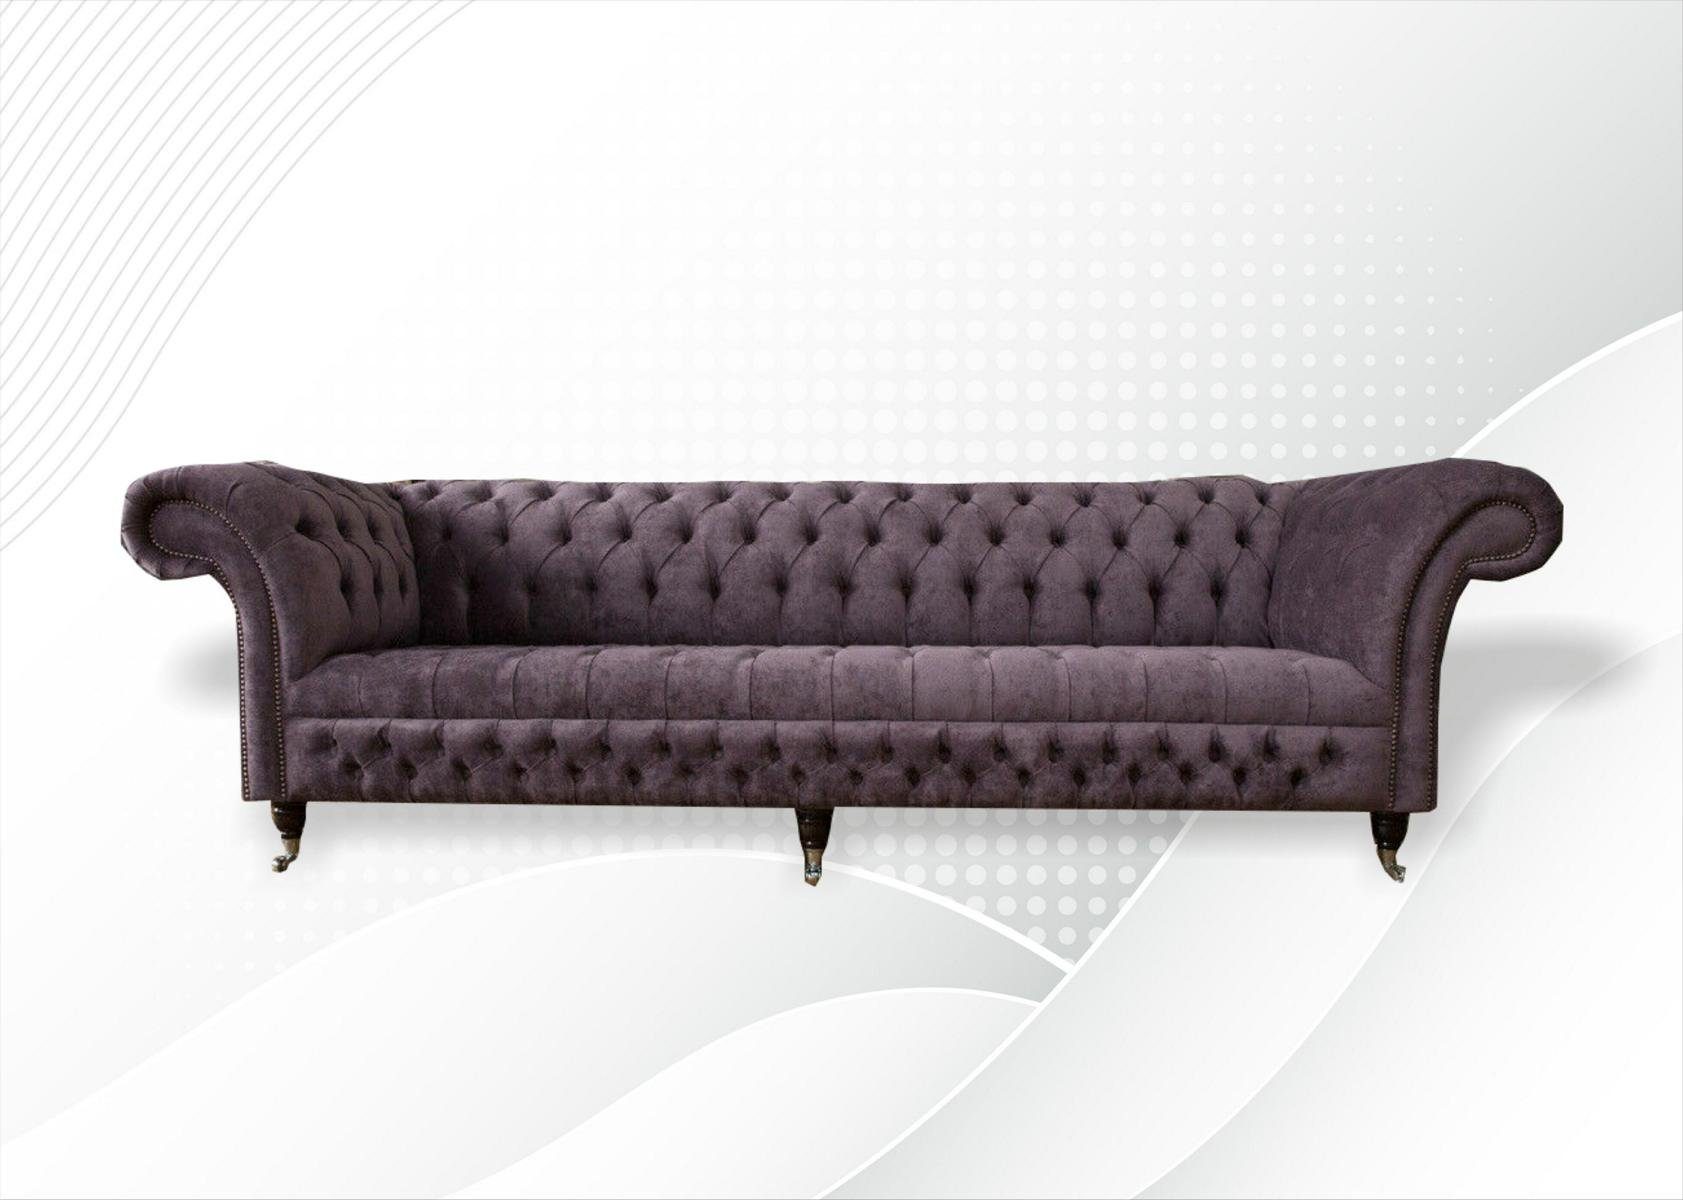 Made 4 Chesterfield xxl Sitzer Sofas Big in 265cm Polster Sofa Sofa JVmoebel Europe Couch Leder,